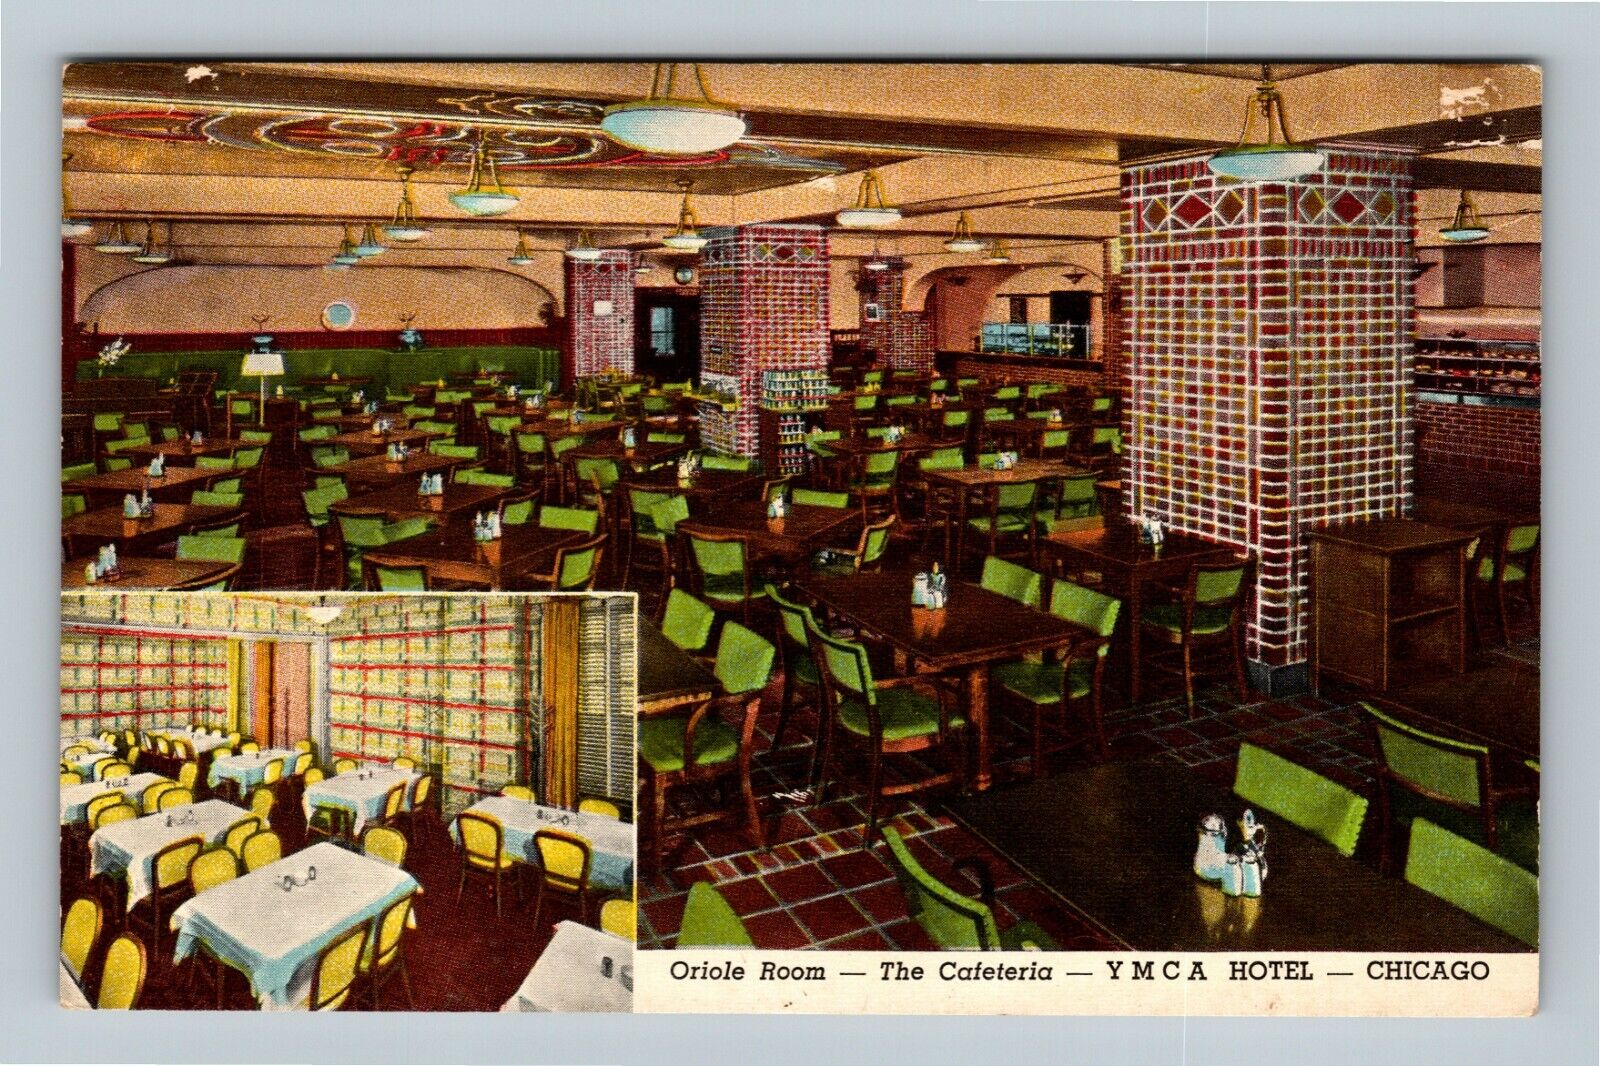 Chicago IL, YMCA Hotel, Oriole Room Cafeteria Dining Vintage Illinois Postcard  